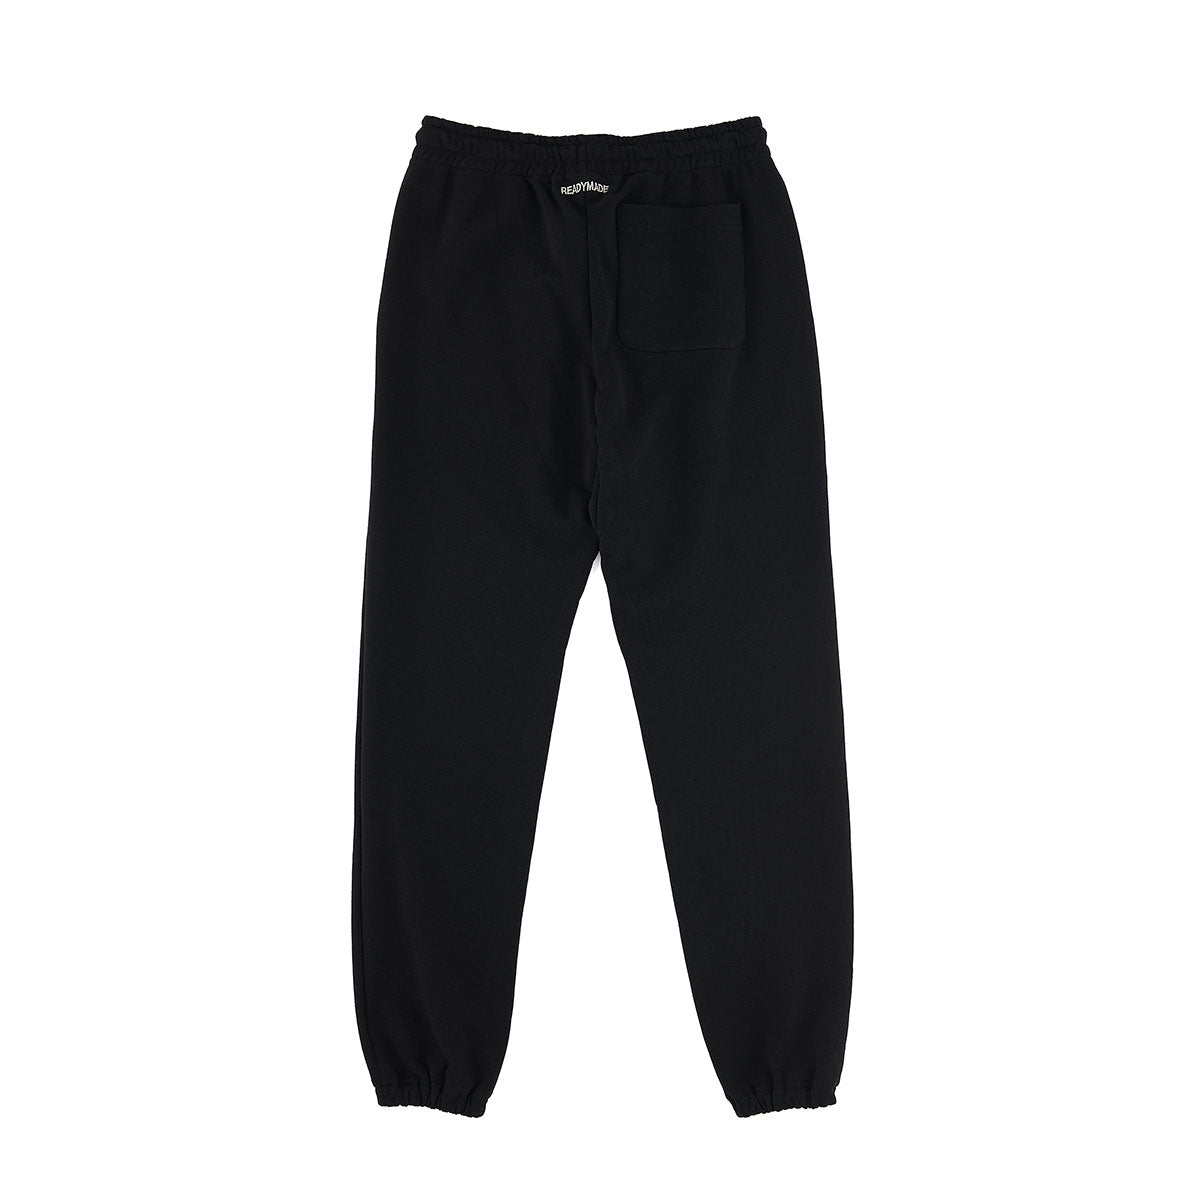 SWEAT PANTS (MENS) - Why are you here?